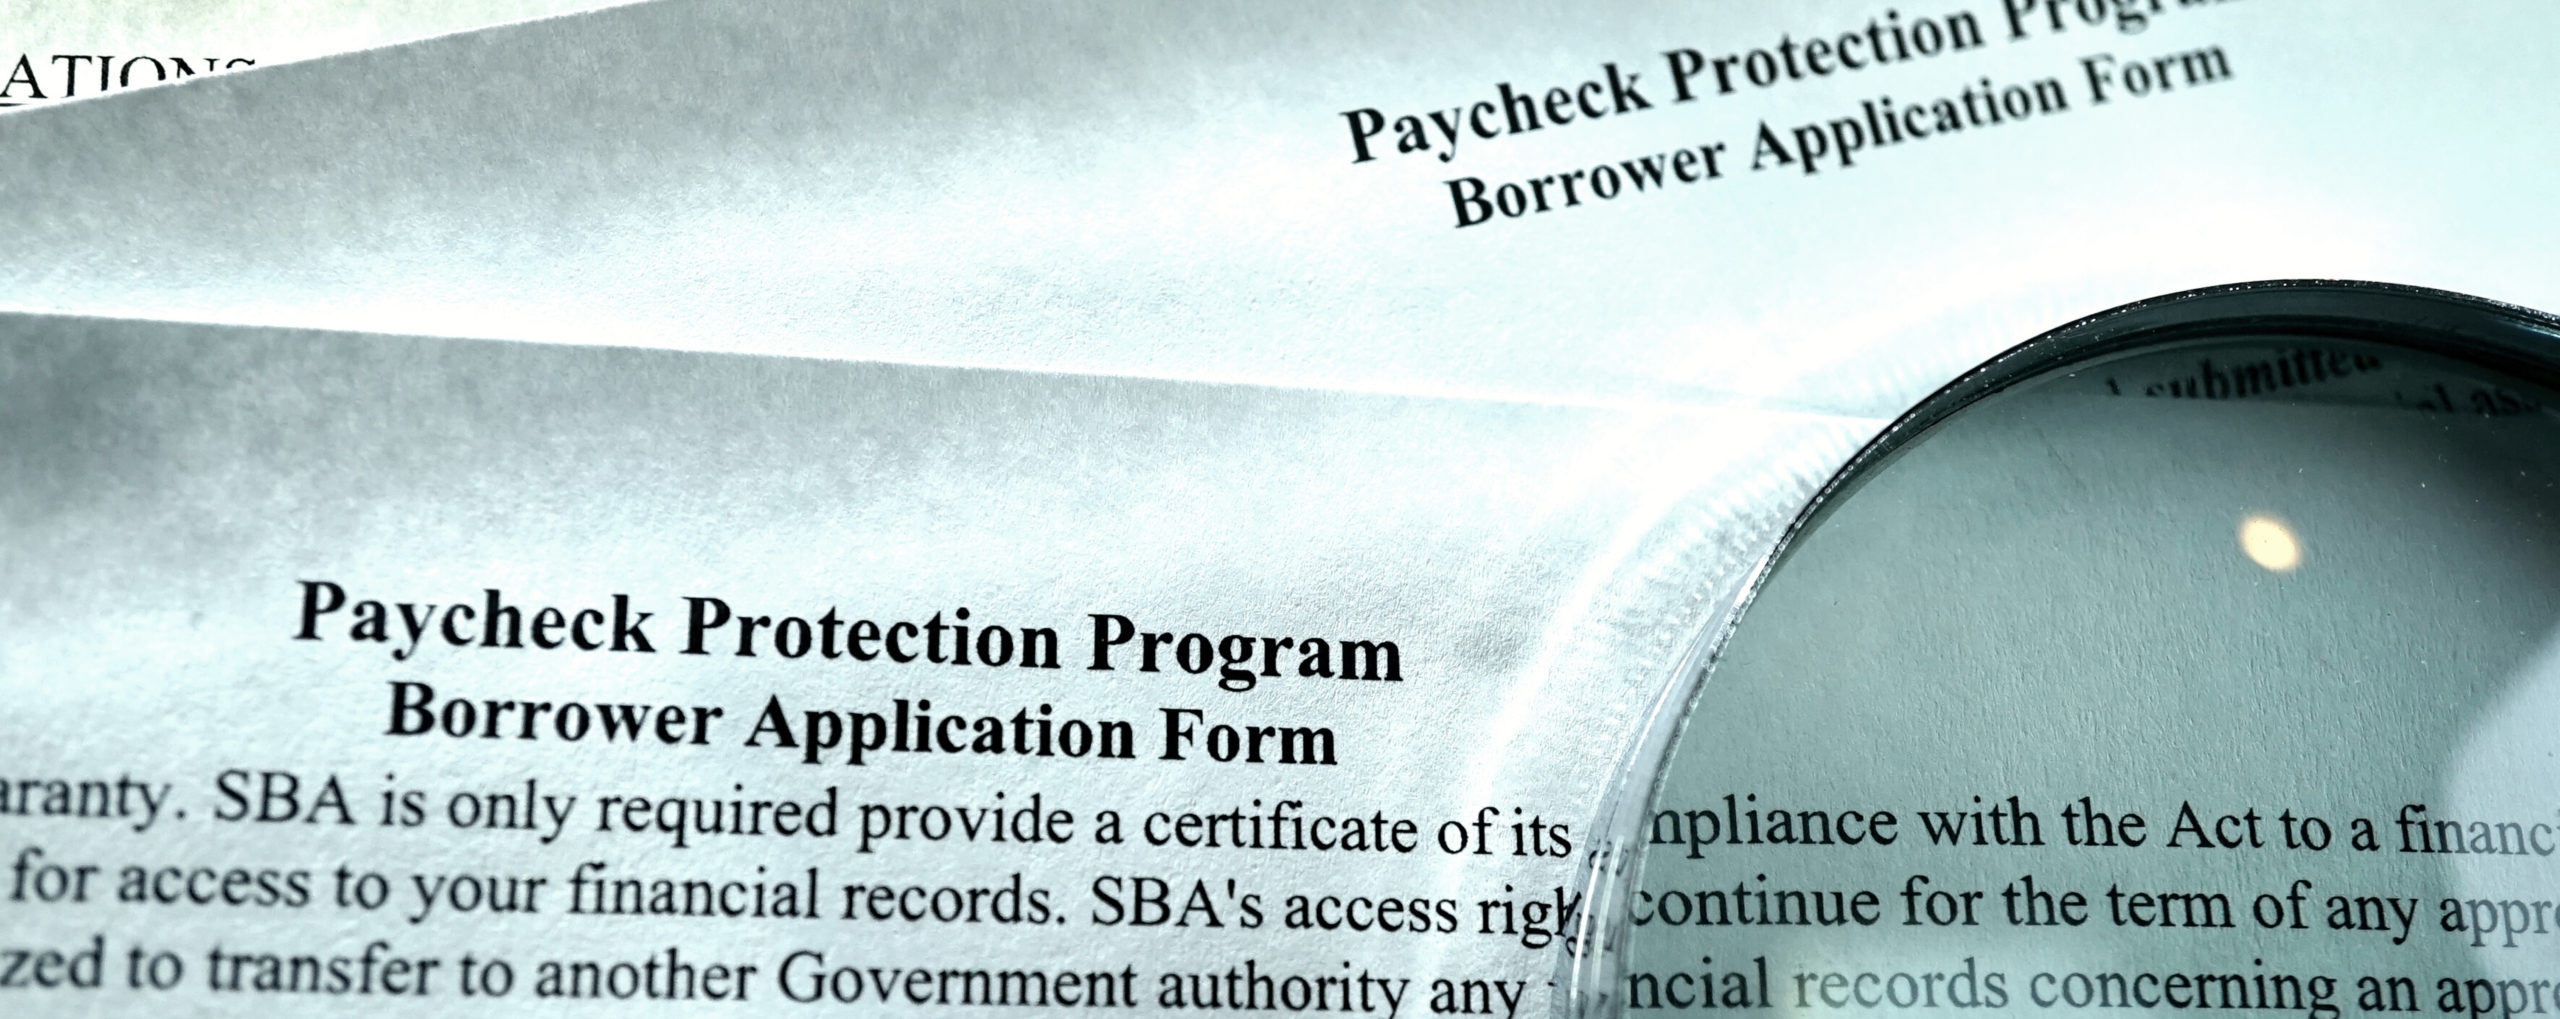 Changes to Paycheck Protection